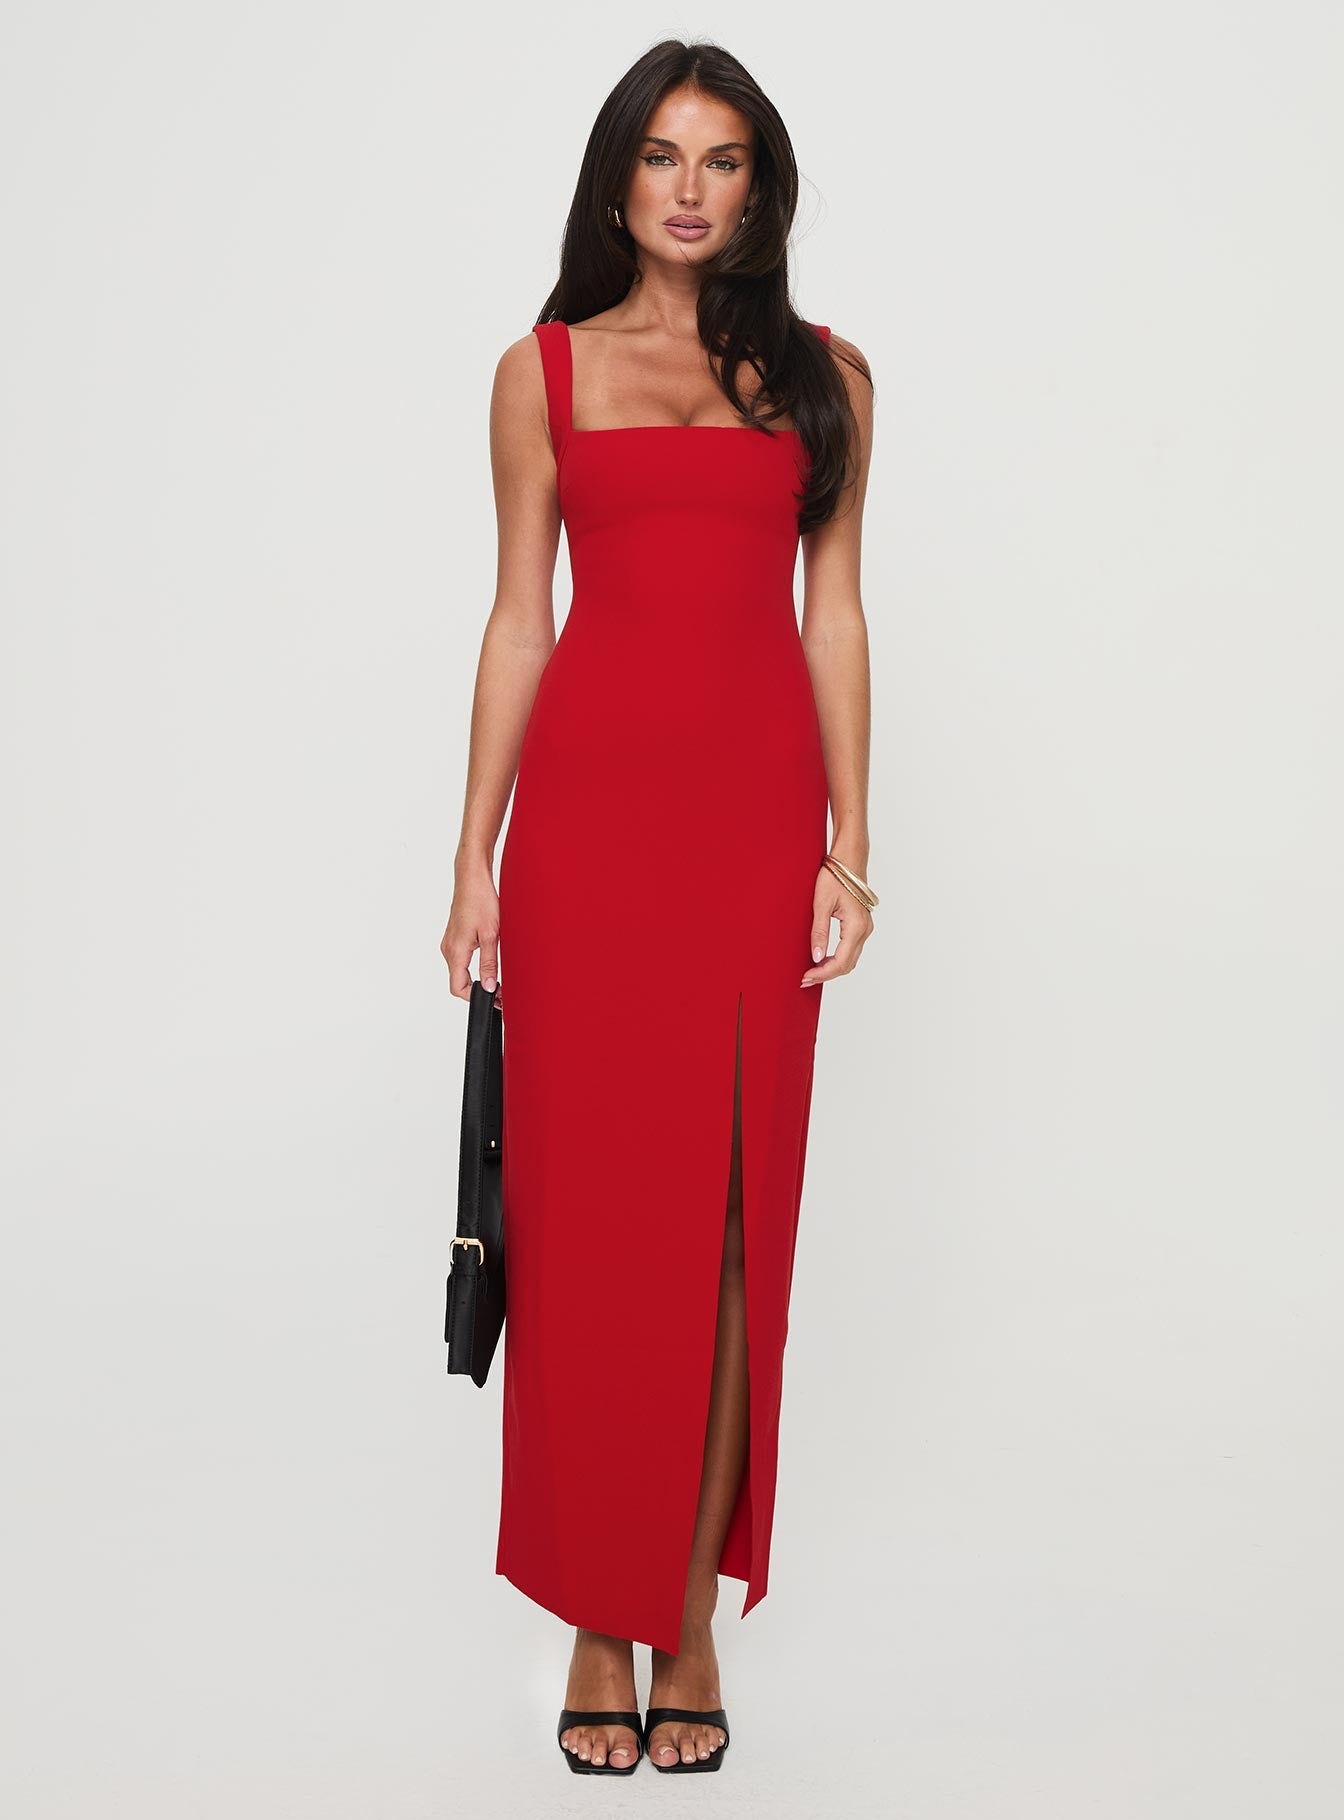 Shop Formal Dress - Bombshell Maxi Dress Red secondary image